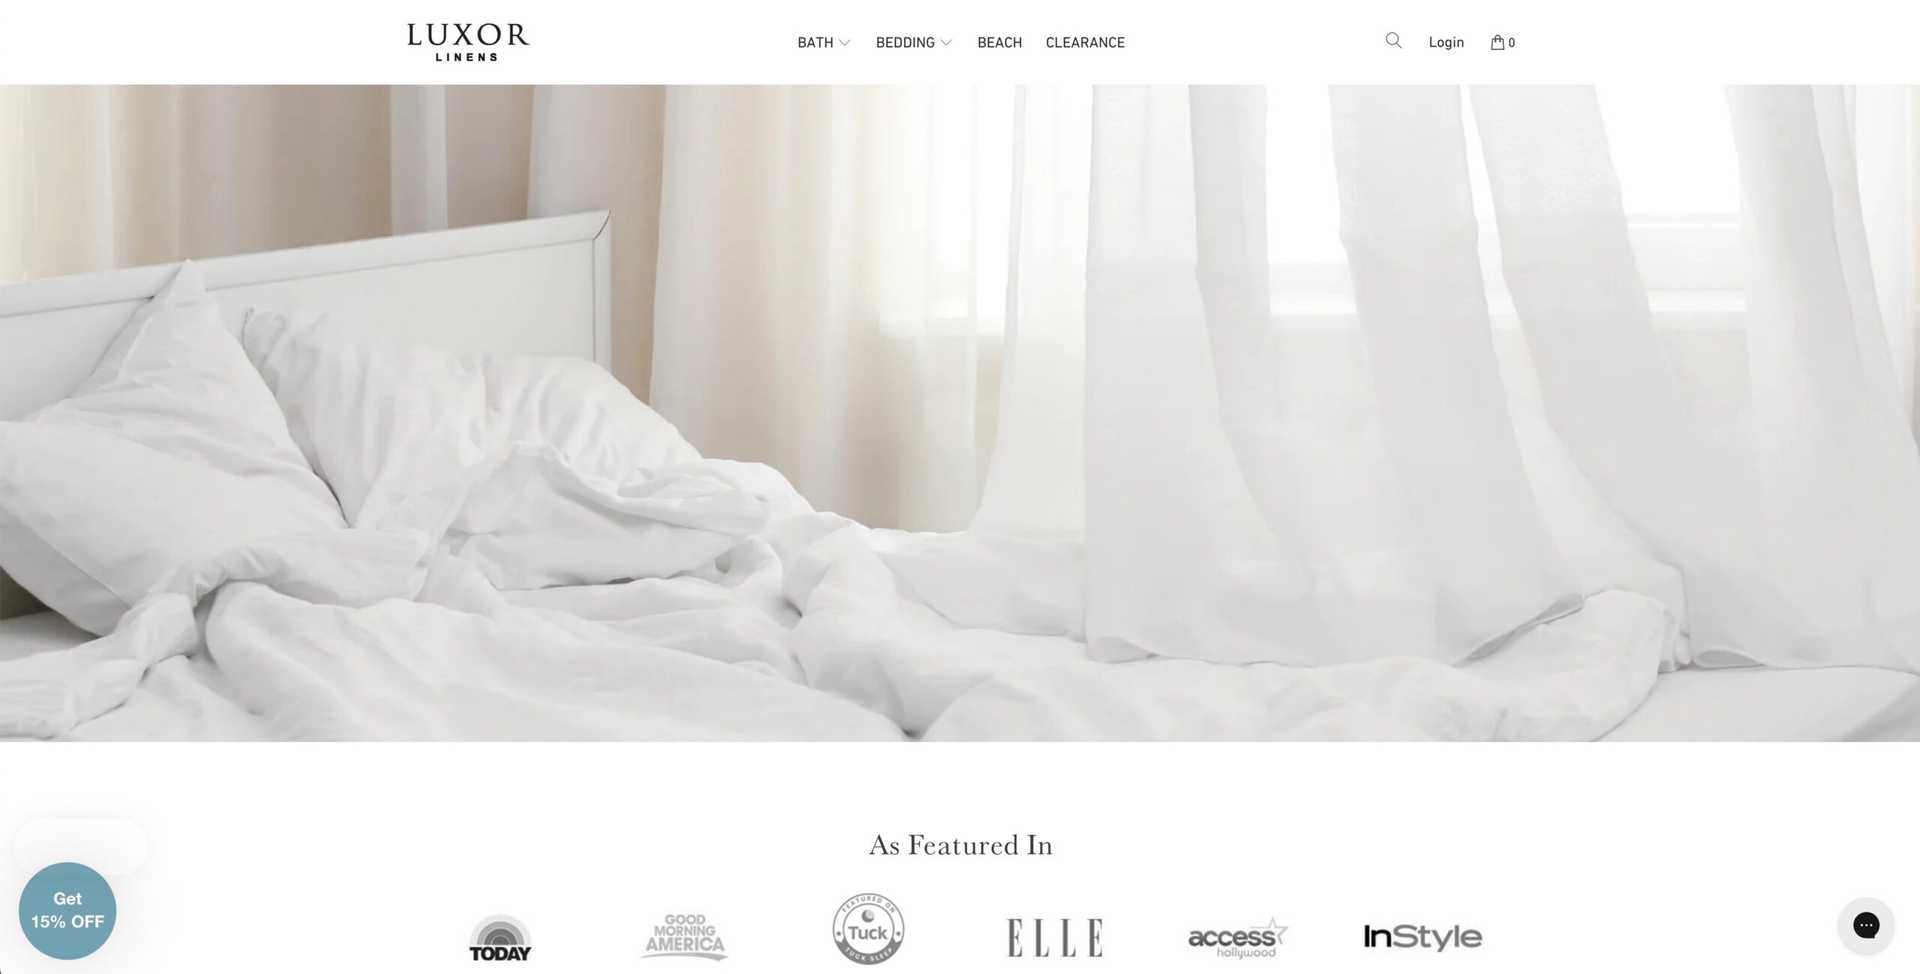 Luxor Linens | Shop Luxury Bedding and Bath at Luxor Linens